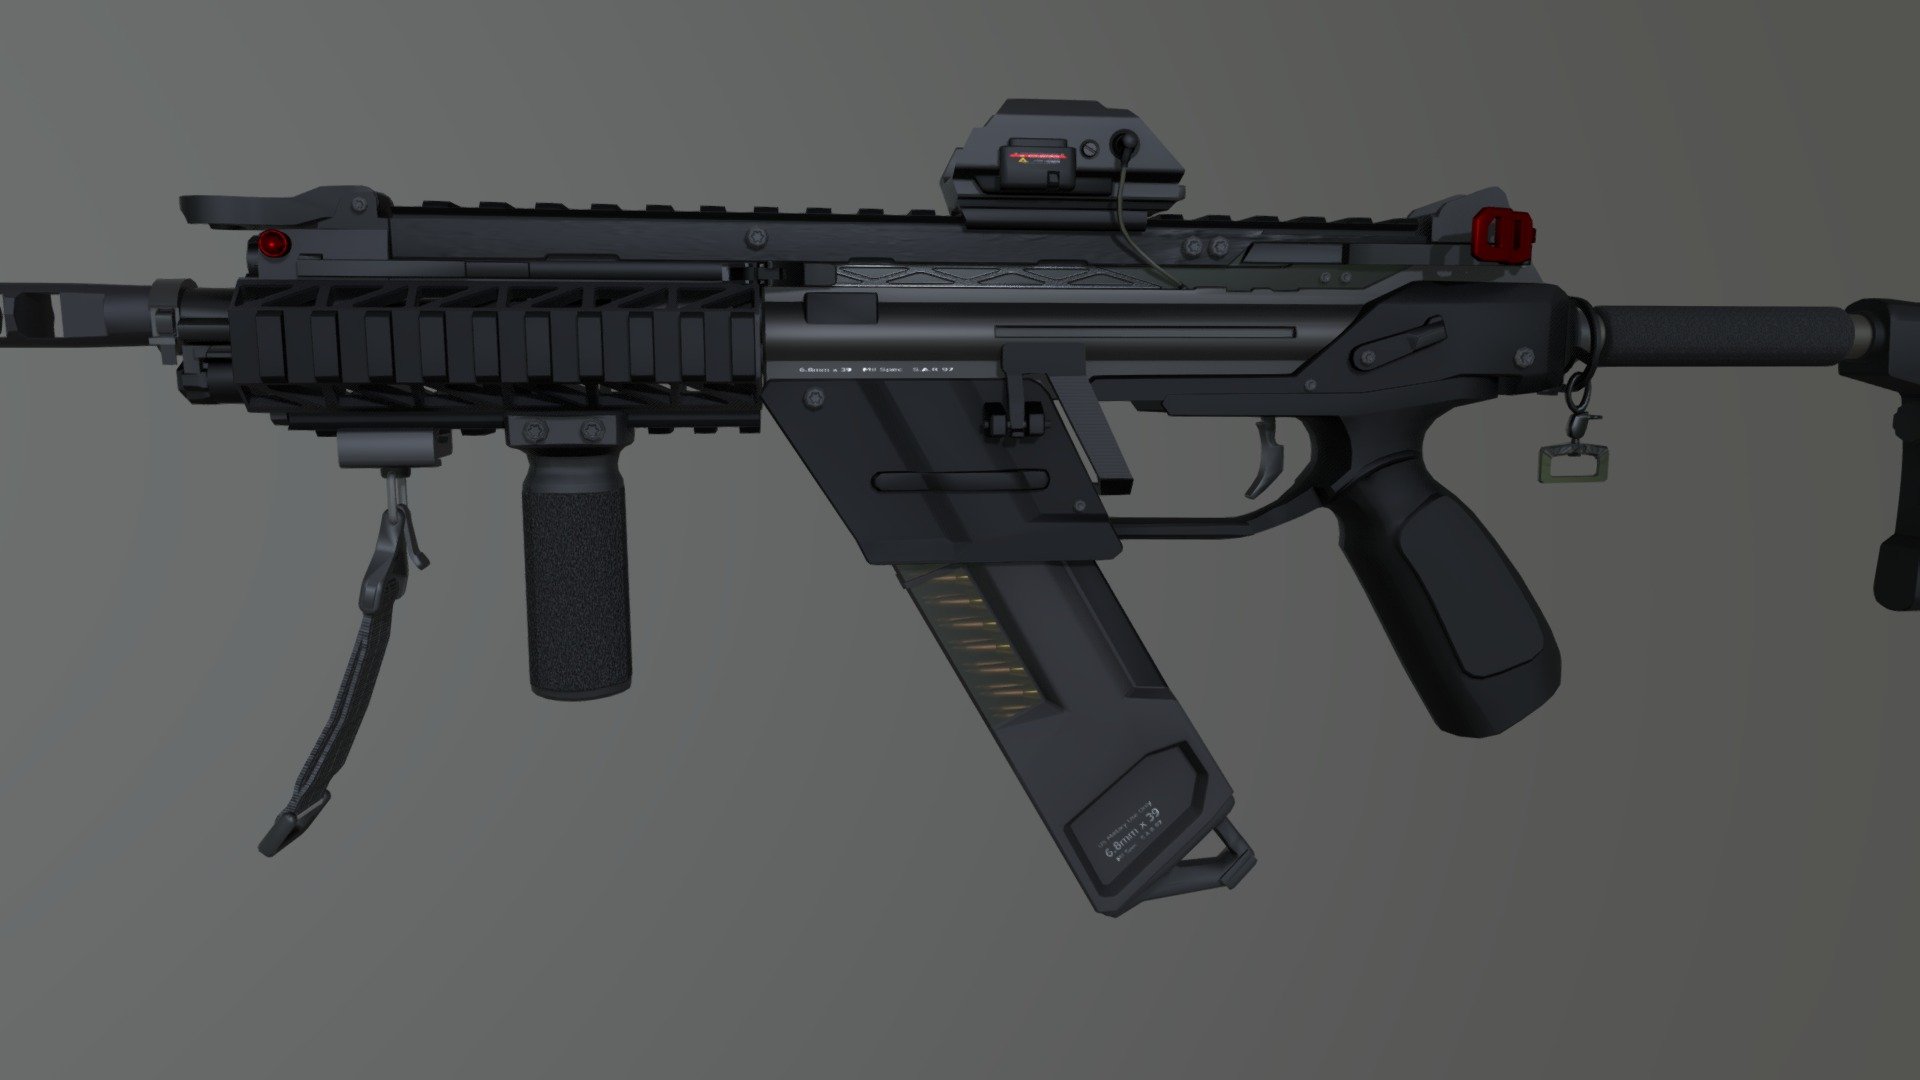 Current WIP side project. Based off the R97 submachine gun 3d model